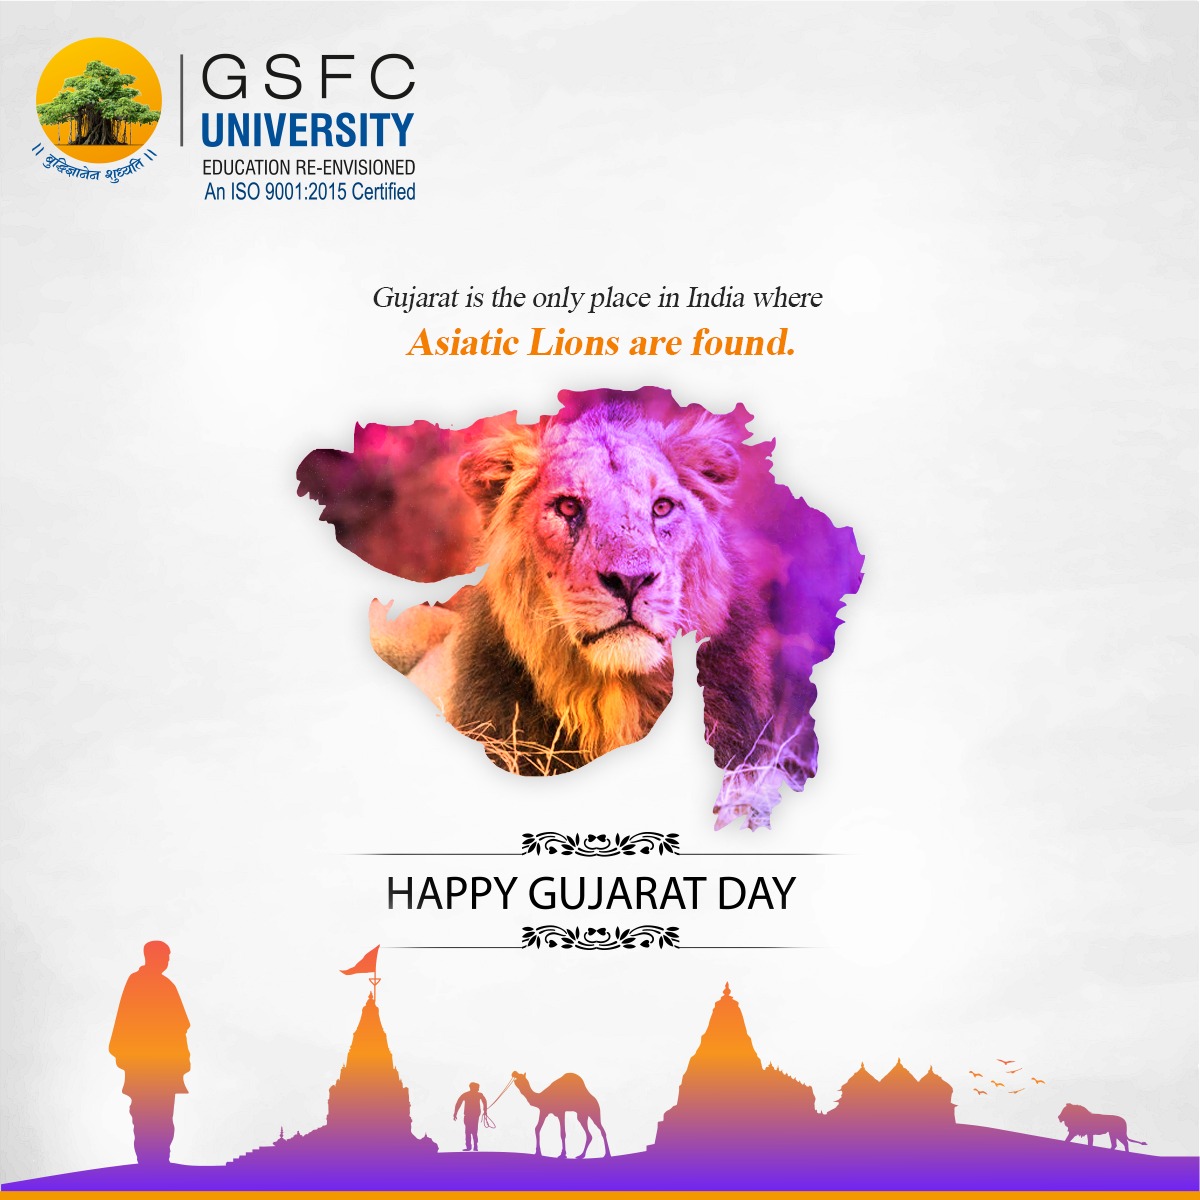 Warm wishes on Gujarat Day! As we commemorate the formation of this remarkable state, let's honor its glorious past and envision a future filled with growth, harmony, and prosperity. Jay Garvi Gujarat!

#GujaratFoundationDay #CelebratingGujarat #GujaratPride #GujaratDay